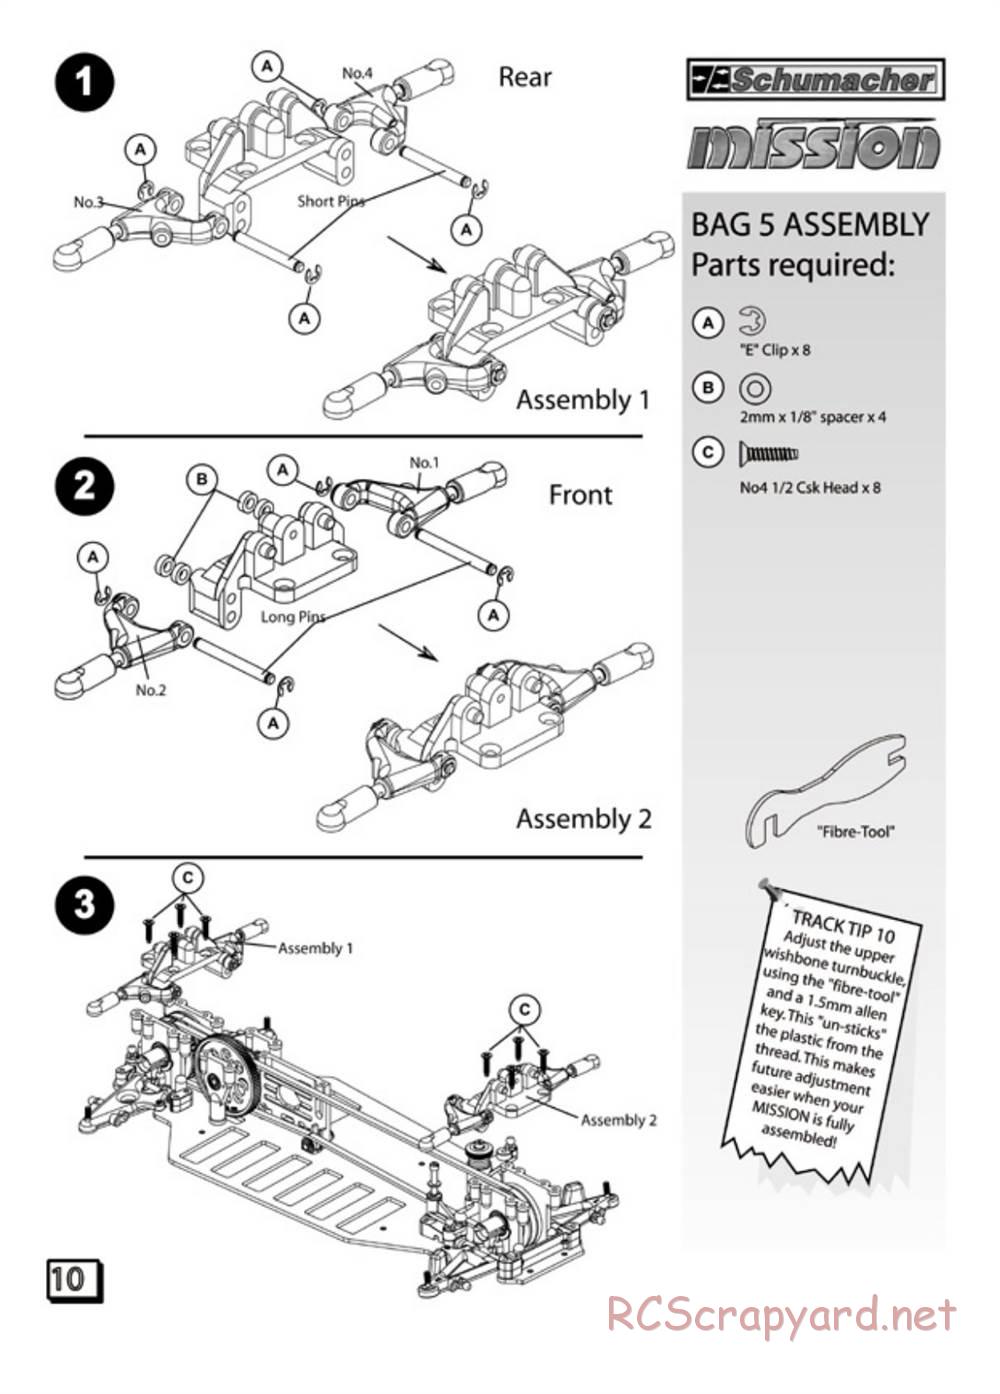 Schumacher - Mission - Manual - Page 11